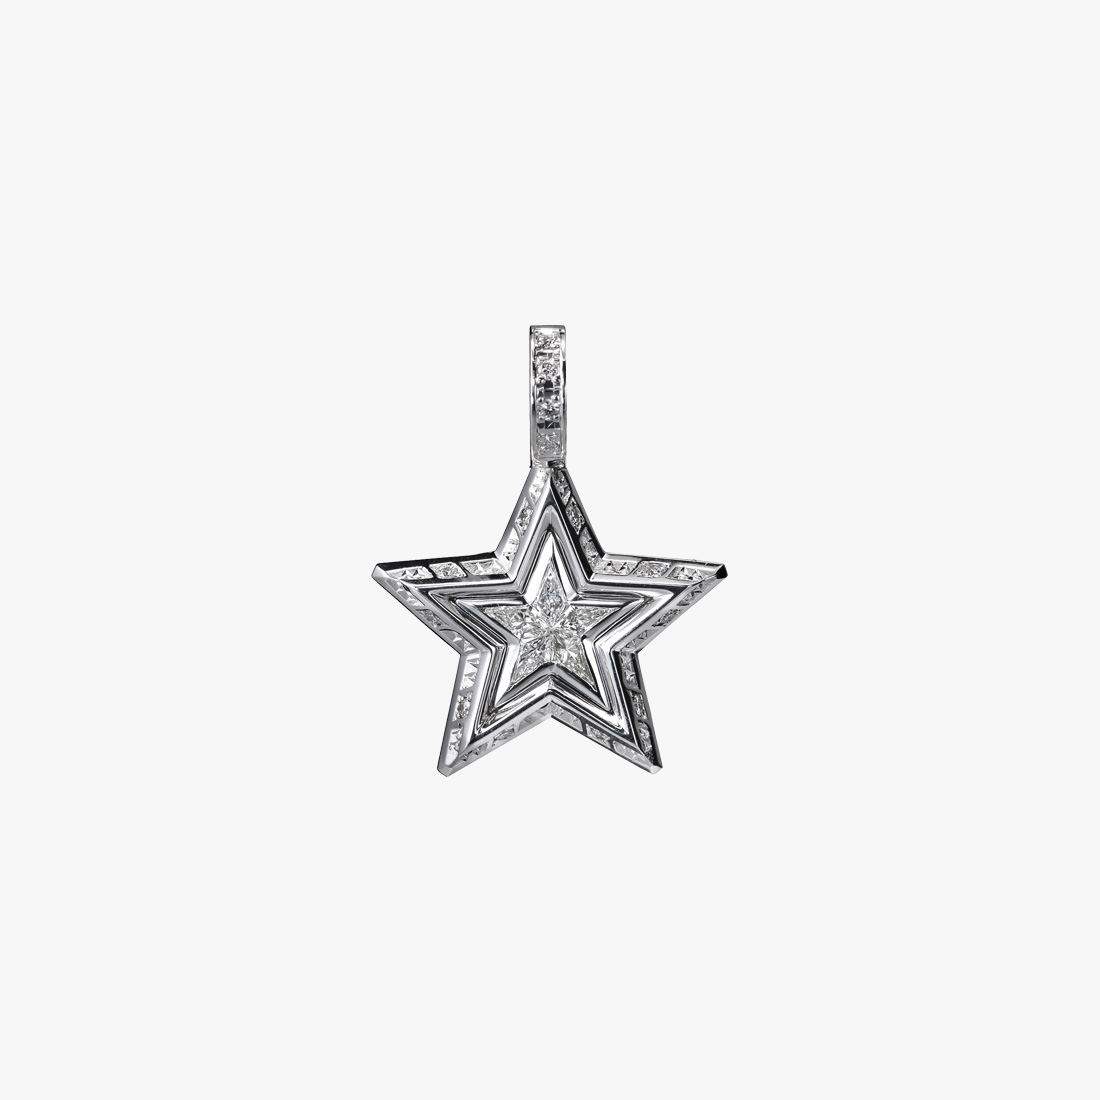 TOP OF STARS, , large